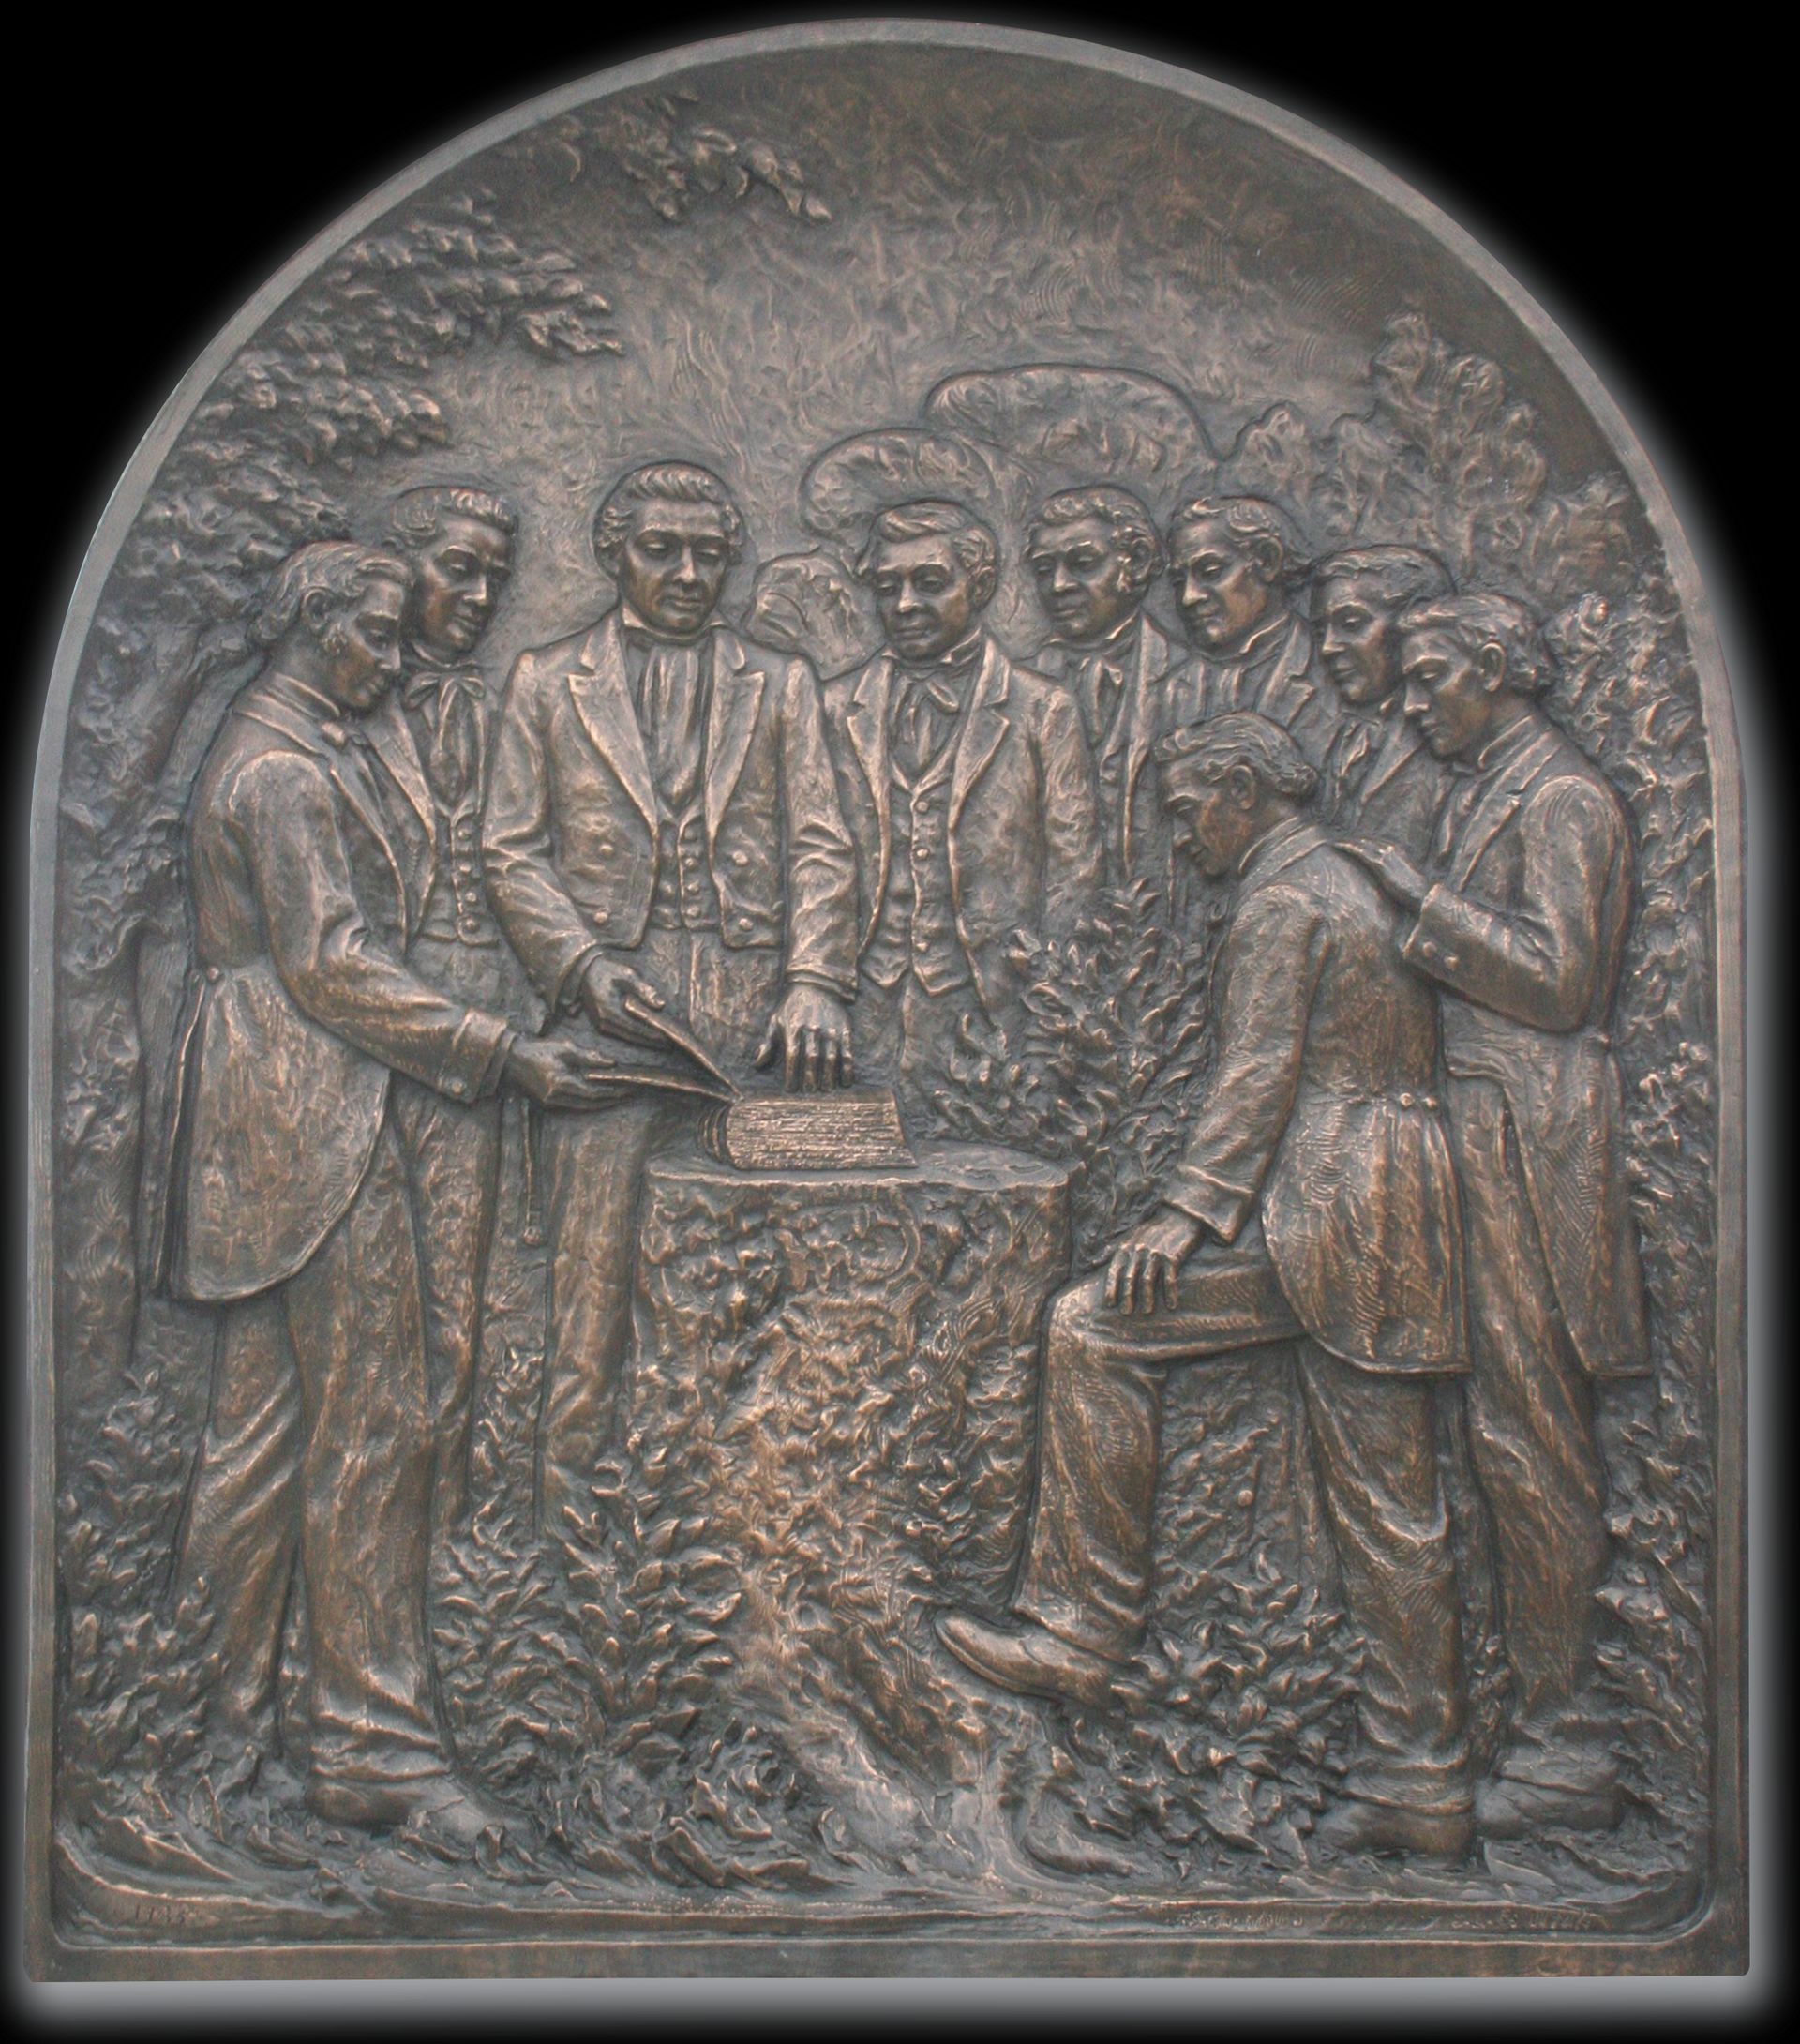 Plaque of Joseph Smith showing plates.